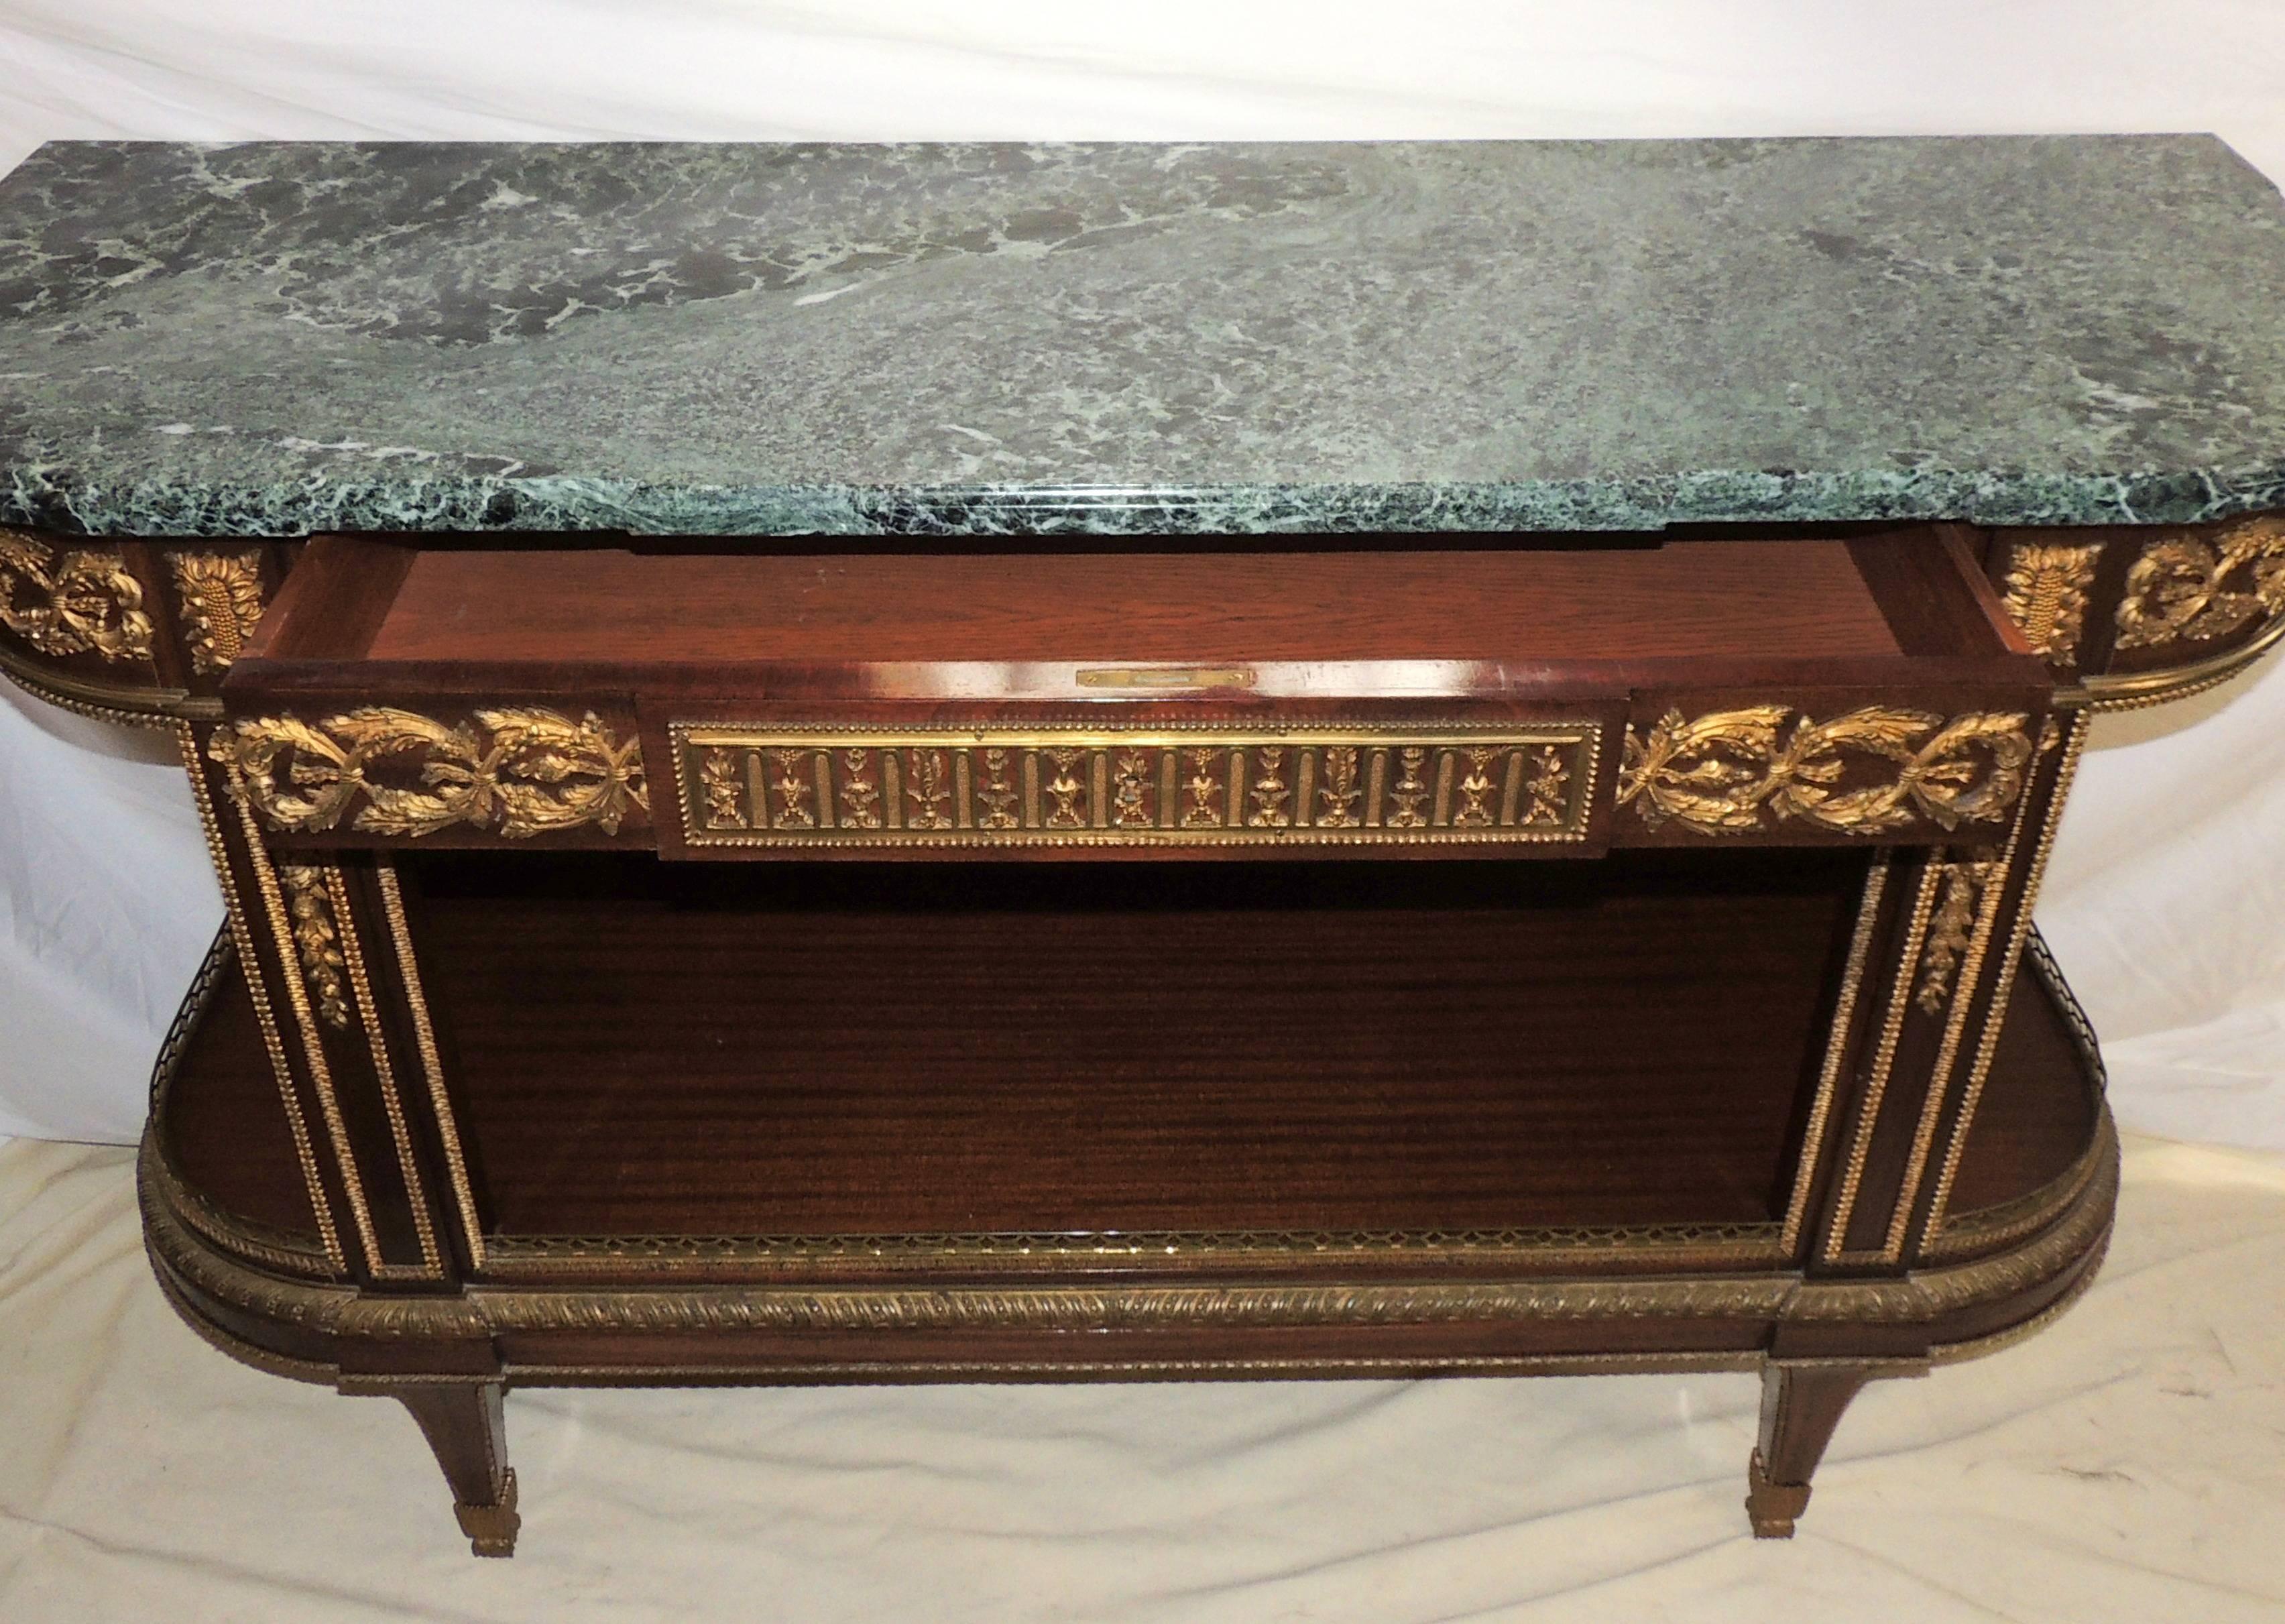 Fine French Ormolu Bronze-Mounted Marble-Top Dessert Demilune Console Sideboard 1